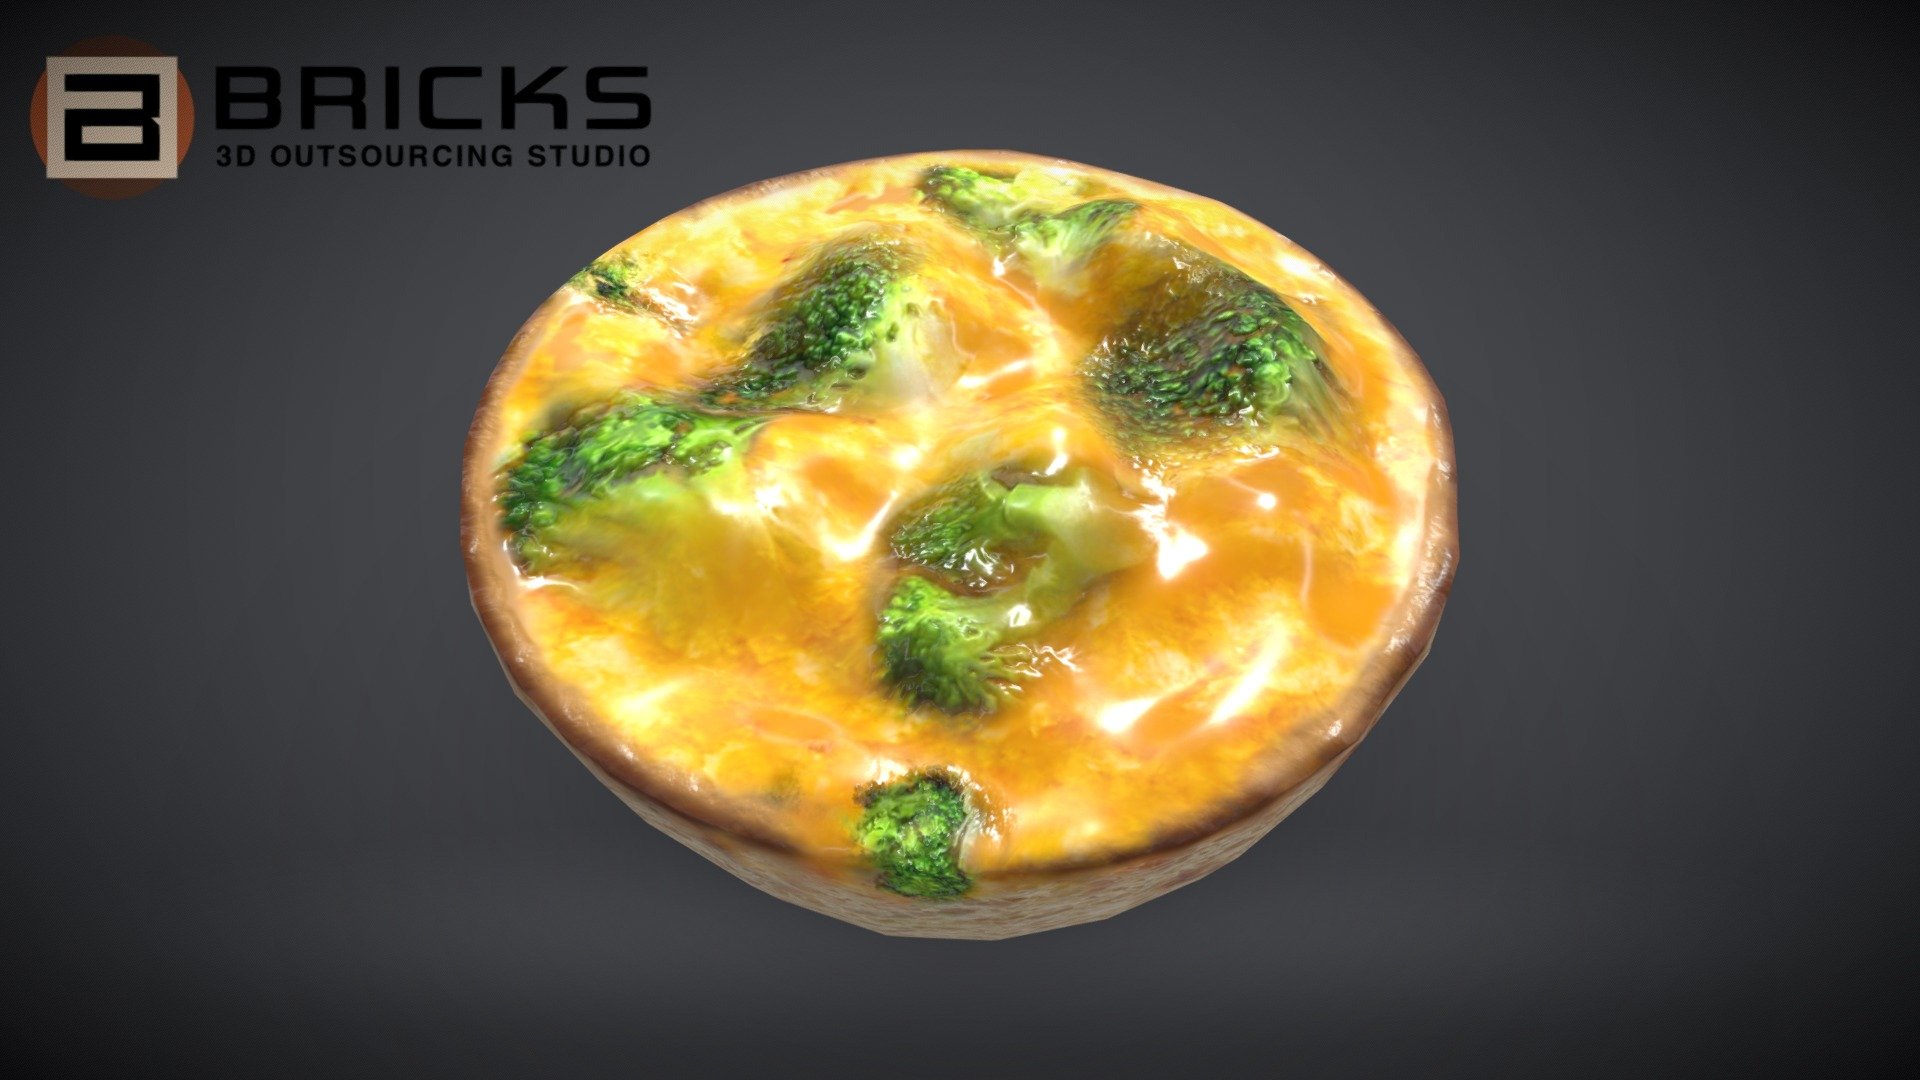 PBR Food Asset:
EggMuffinBroccoli
Polycount: 1000
Vertex count: 502
Texture Size: 2048px x 2048px
Normal: OpenGL

If you need any adjust in file please contact us: team@bricks3dstudio.com

Hire us: tringuyen@bricks3dstudio.com
Here is us: https://www.bricks3dstudio.com/
        https://www.artstation.com/bricksstudio
        https://www.facebook.com/Bricks3dstudio/
        https://www.linkedin.com/in/bricks-studio-b10462252/ - EggMuffinBroccoli - Buy Royalty Free 3D model by Bricks Studio (@bricks3dstudio) 3d model